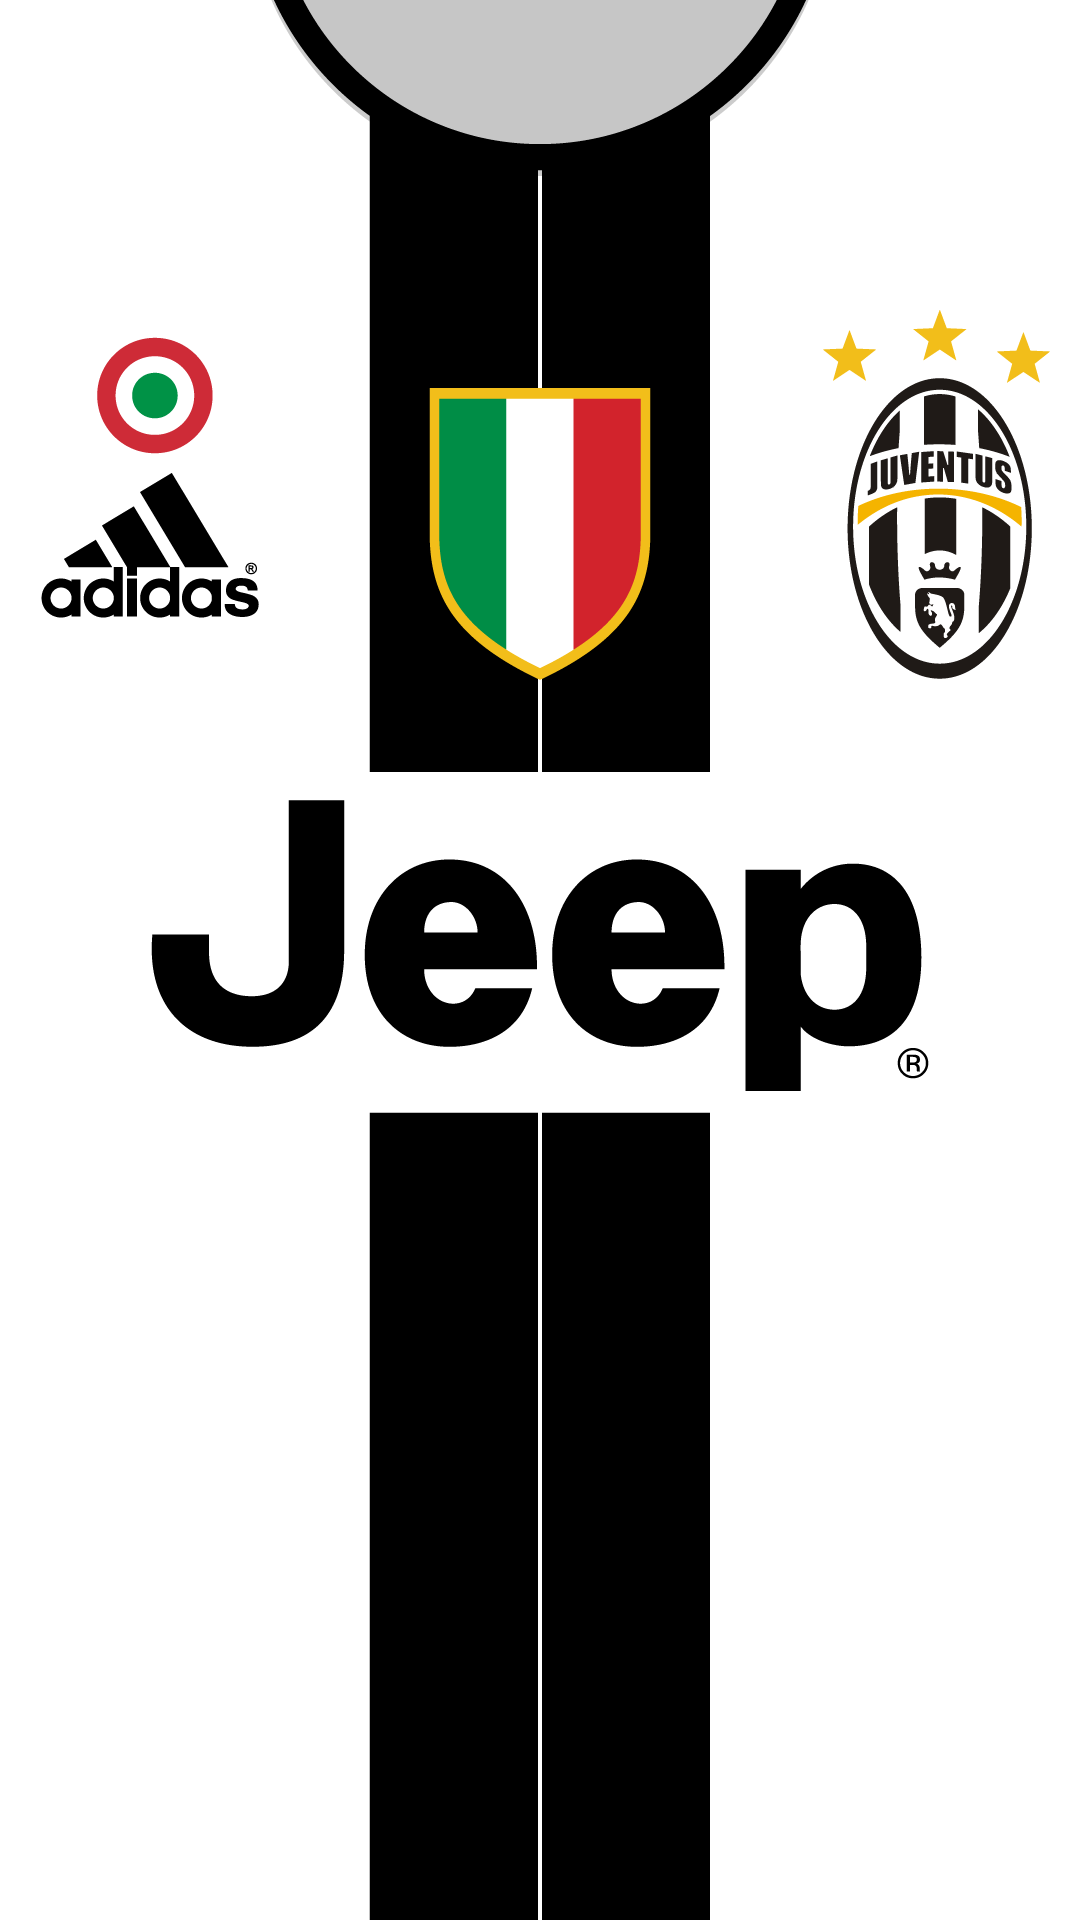 Free Download Juventus Wallpaper For Iphone 7 2018 Live Wallpaper Hd 1080x1920 For Your Desktop Mobile Tablet Explore 100 Juventus 2018 Wallpapers Juventus 2018 Wallpapers Juventus Wallpaper Juventus Wallpapers